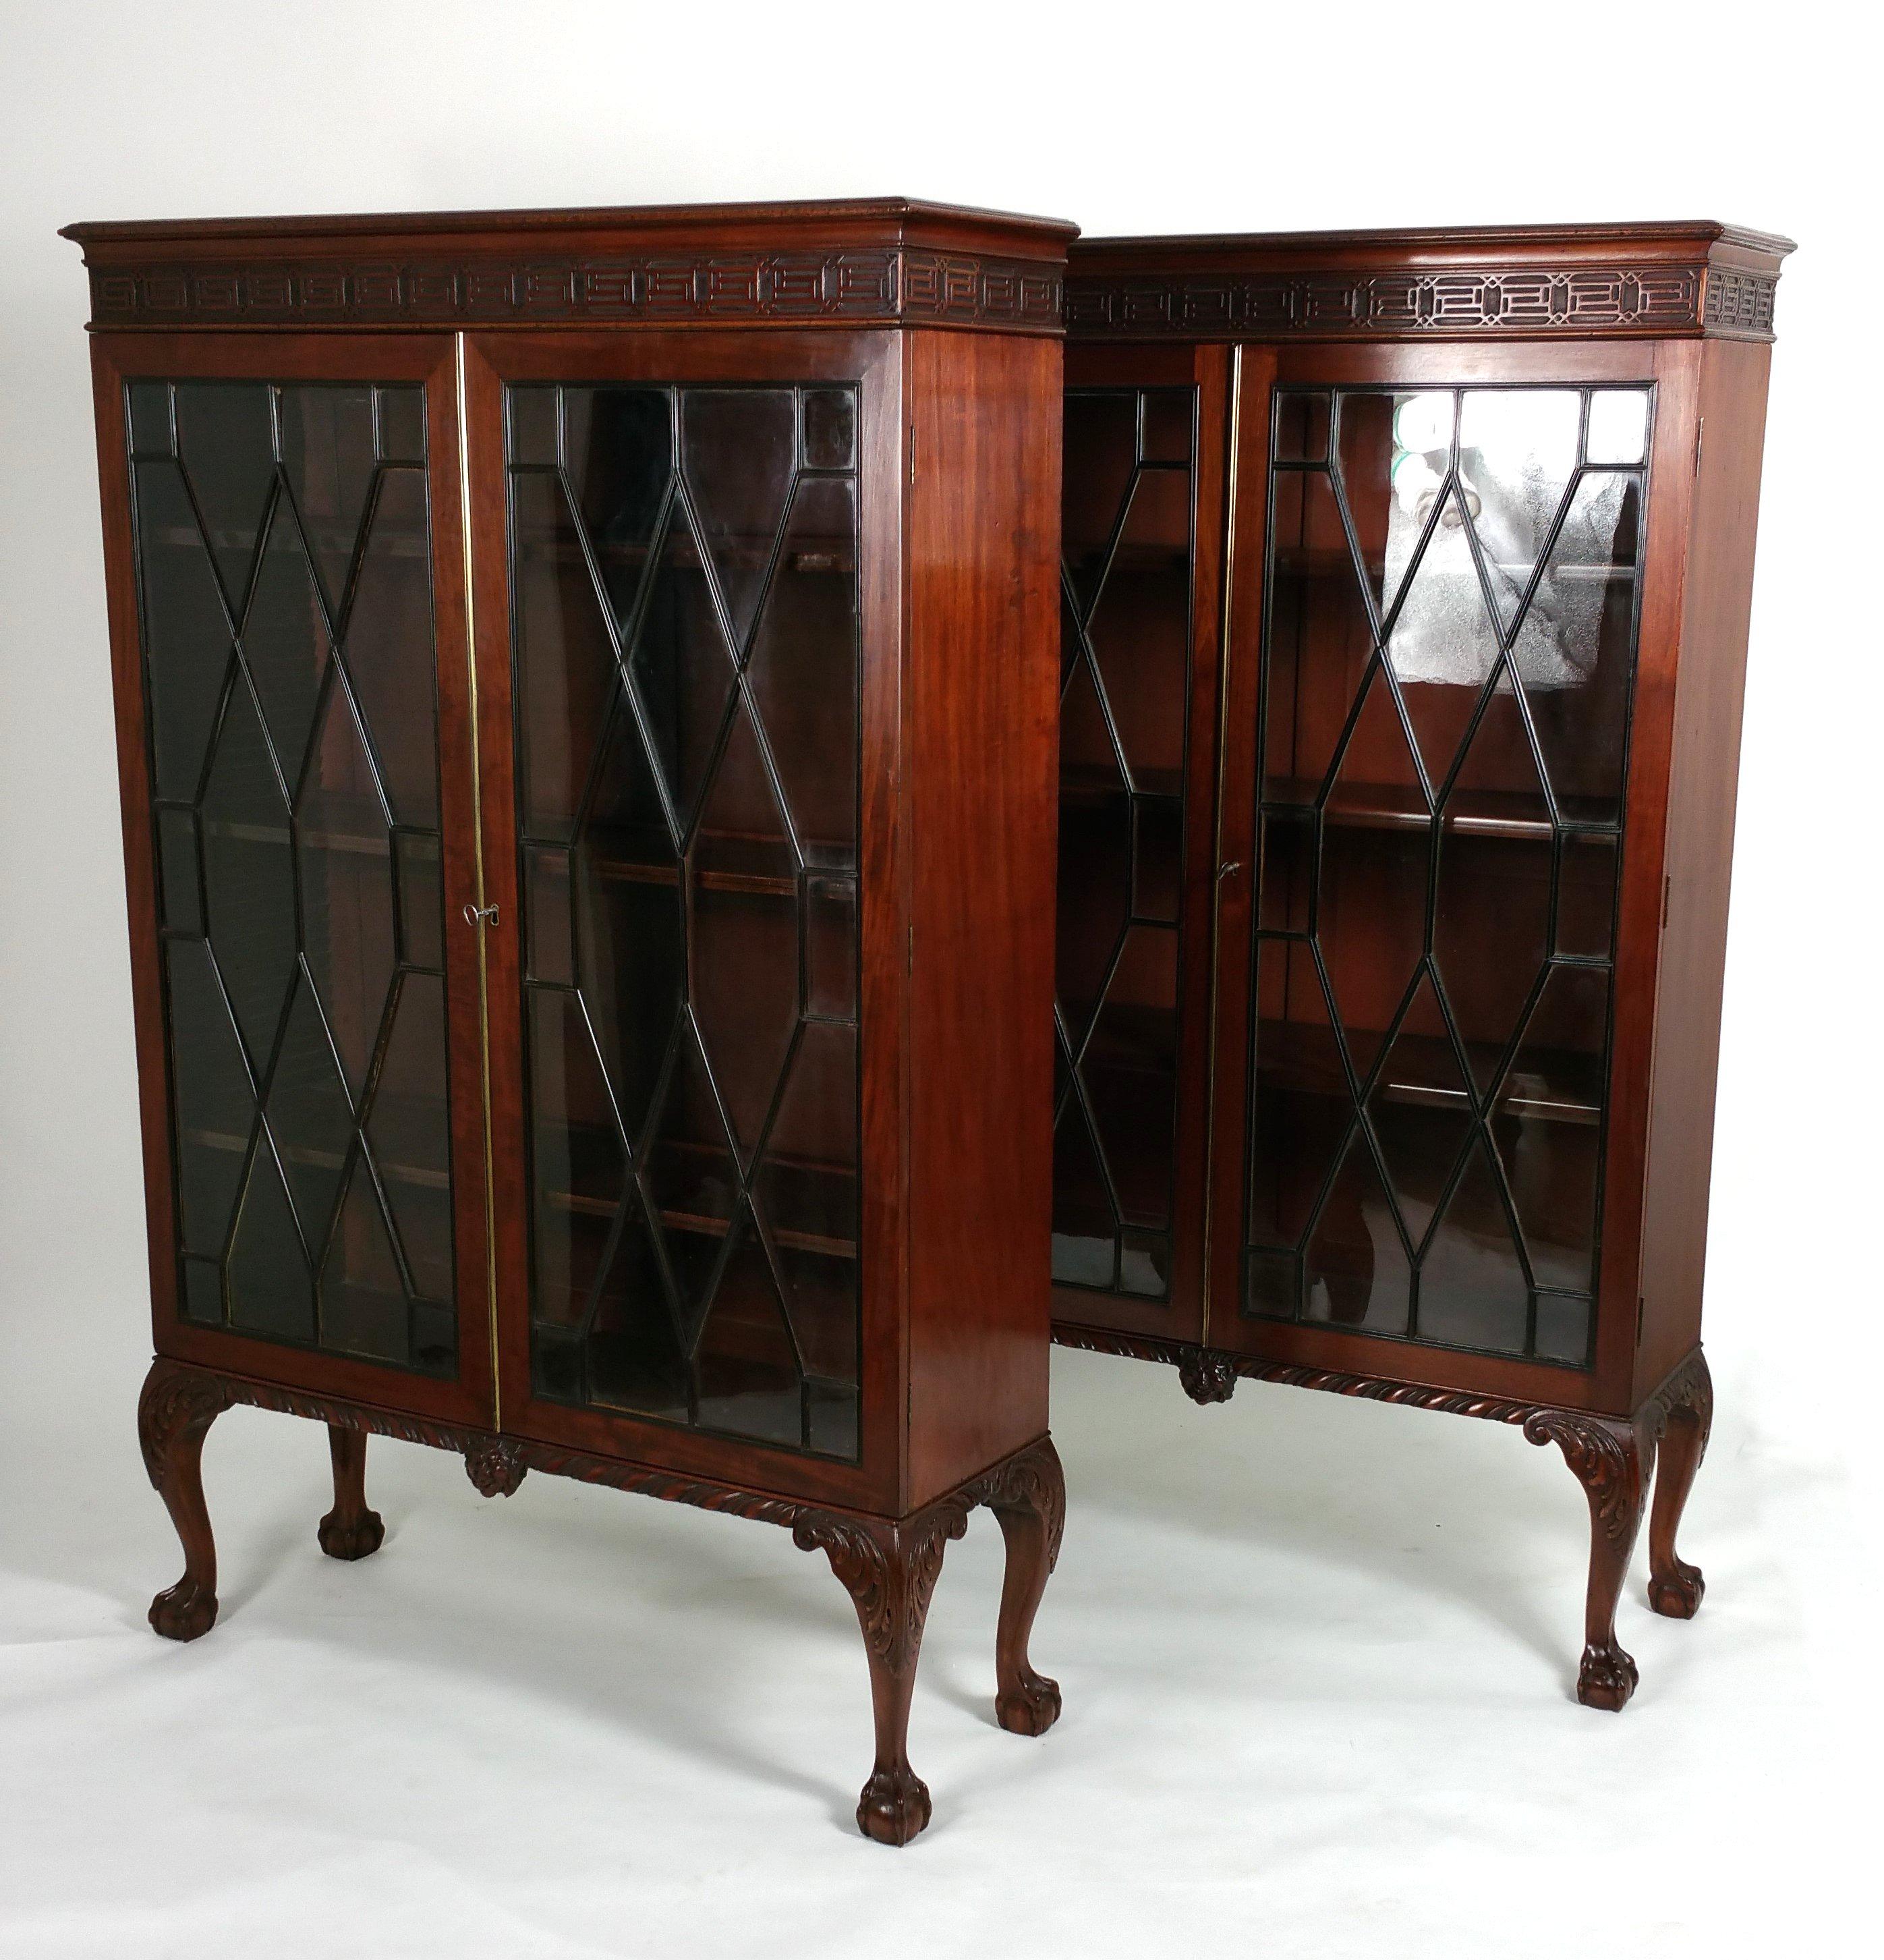 This gorgeous and very stylish pair of Chippendale revival mahogany 2-door bookcases features ebony astragal glazed doors with the original lock and key. Both bookcases have 3 adjustable ebony inlaid shelves supported on cabriole legs with a central